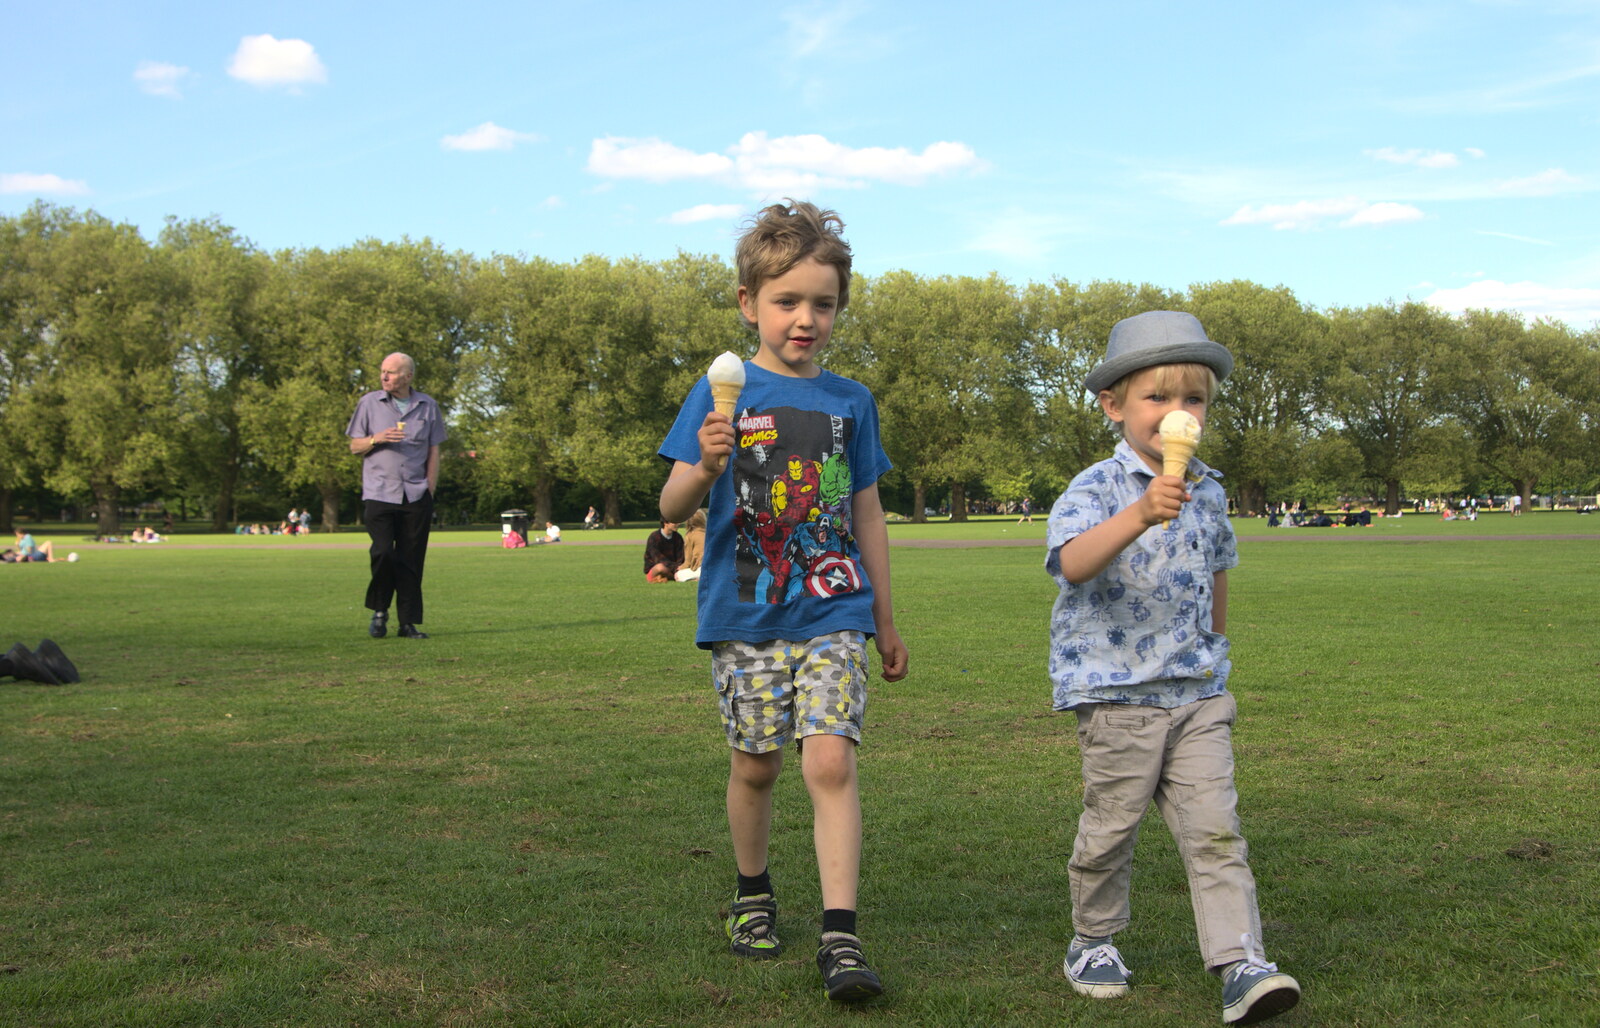 Fred and Harry have scored Ice Cream from Punting With Grandad, Cambridge, Cambridgeshire - 6th June 2015